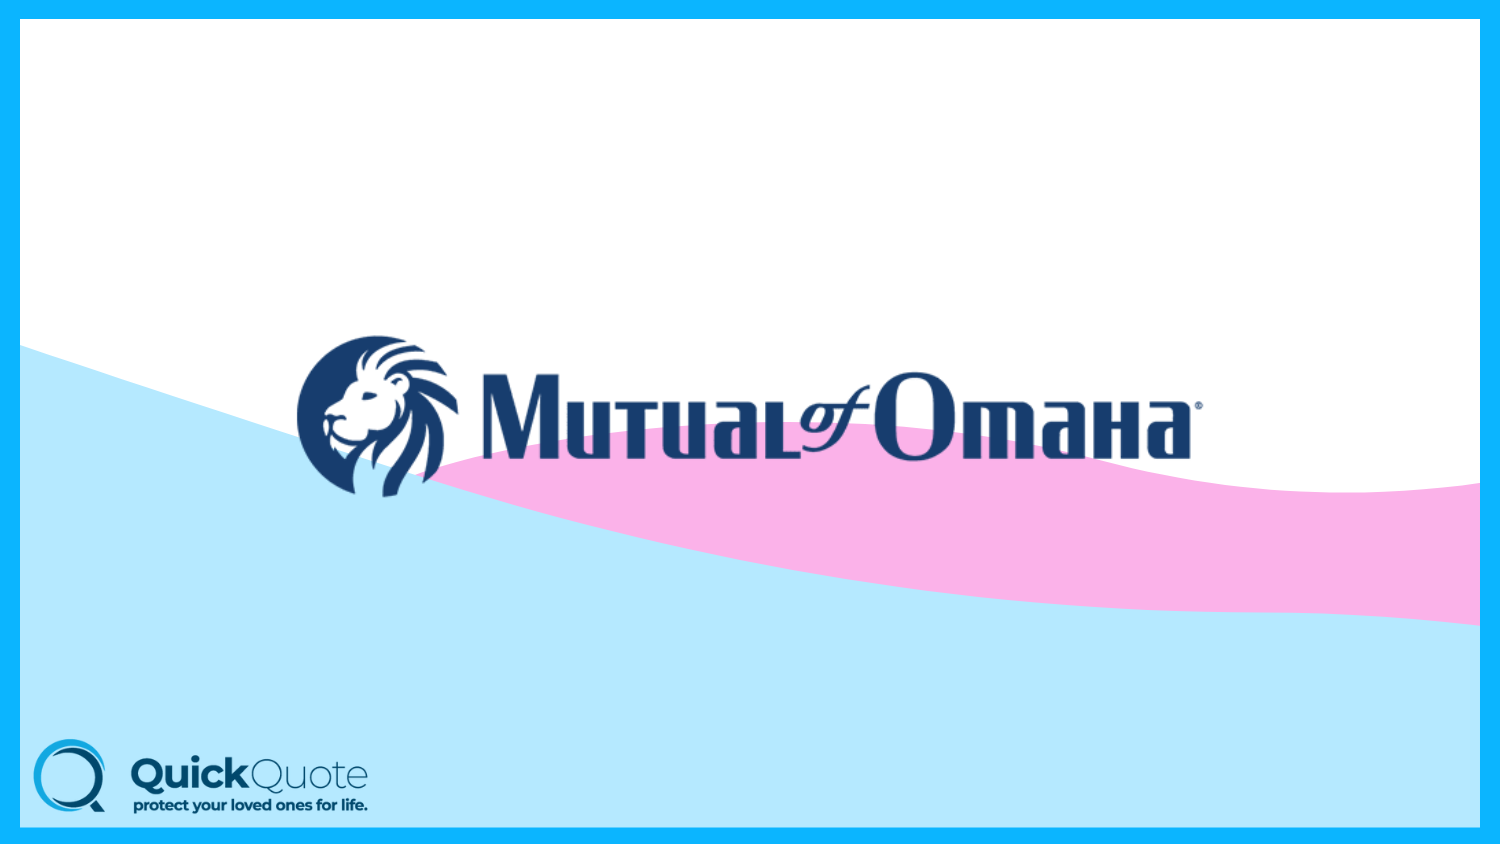 Mutual of Omaha: Best Life Insurance for Smokeless Tobacco Users